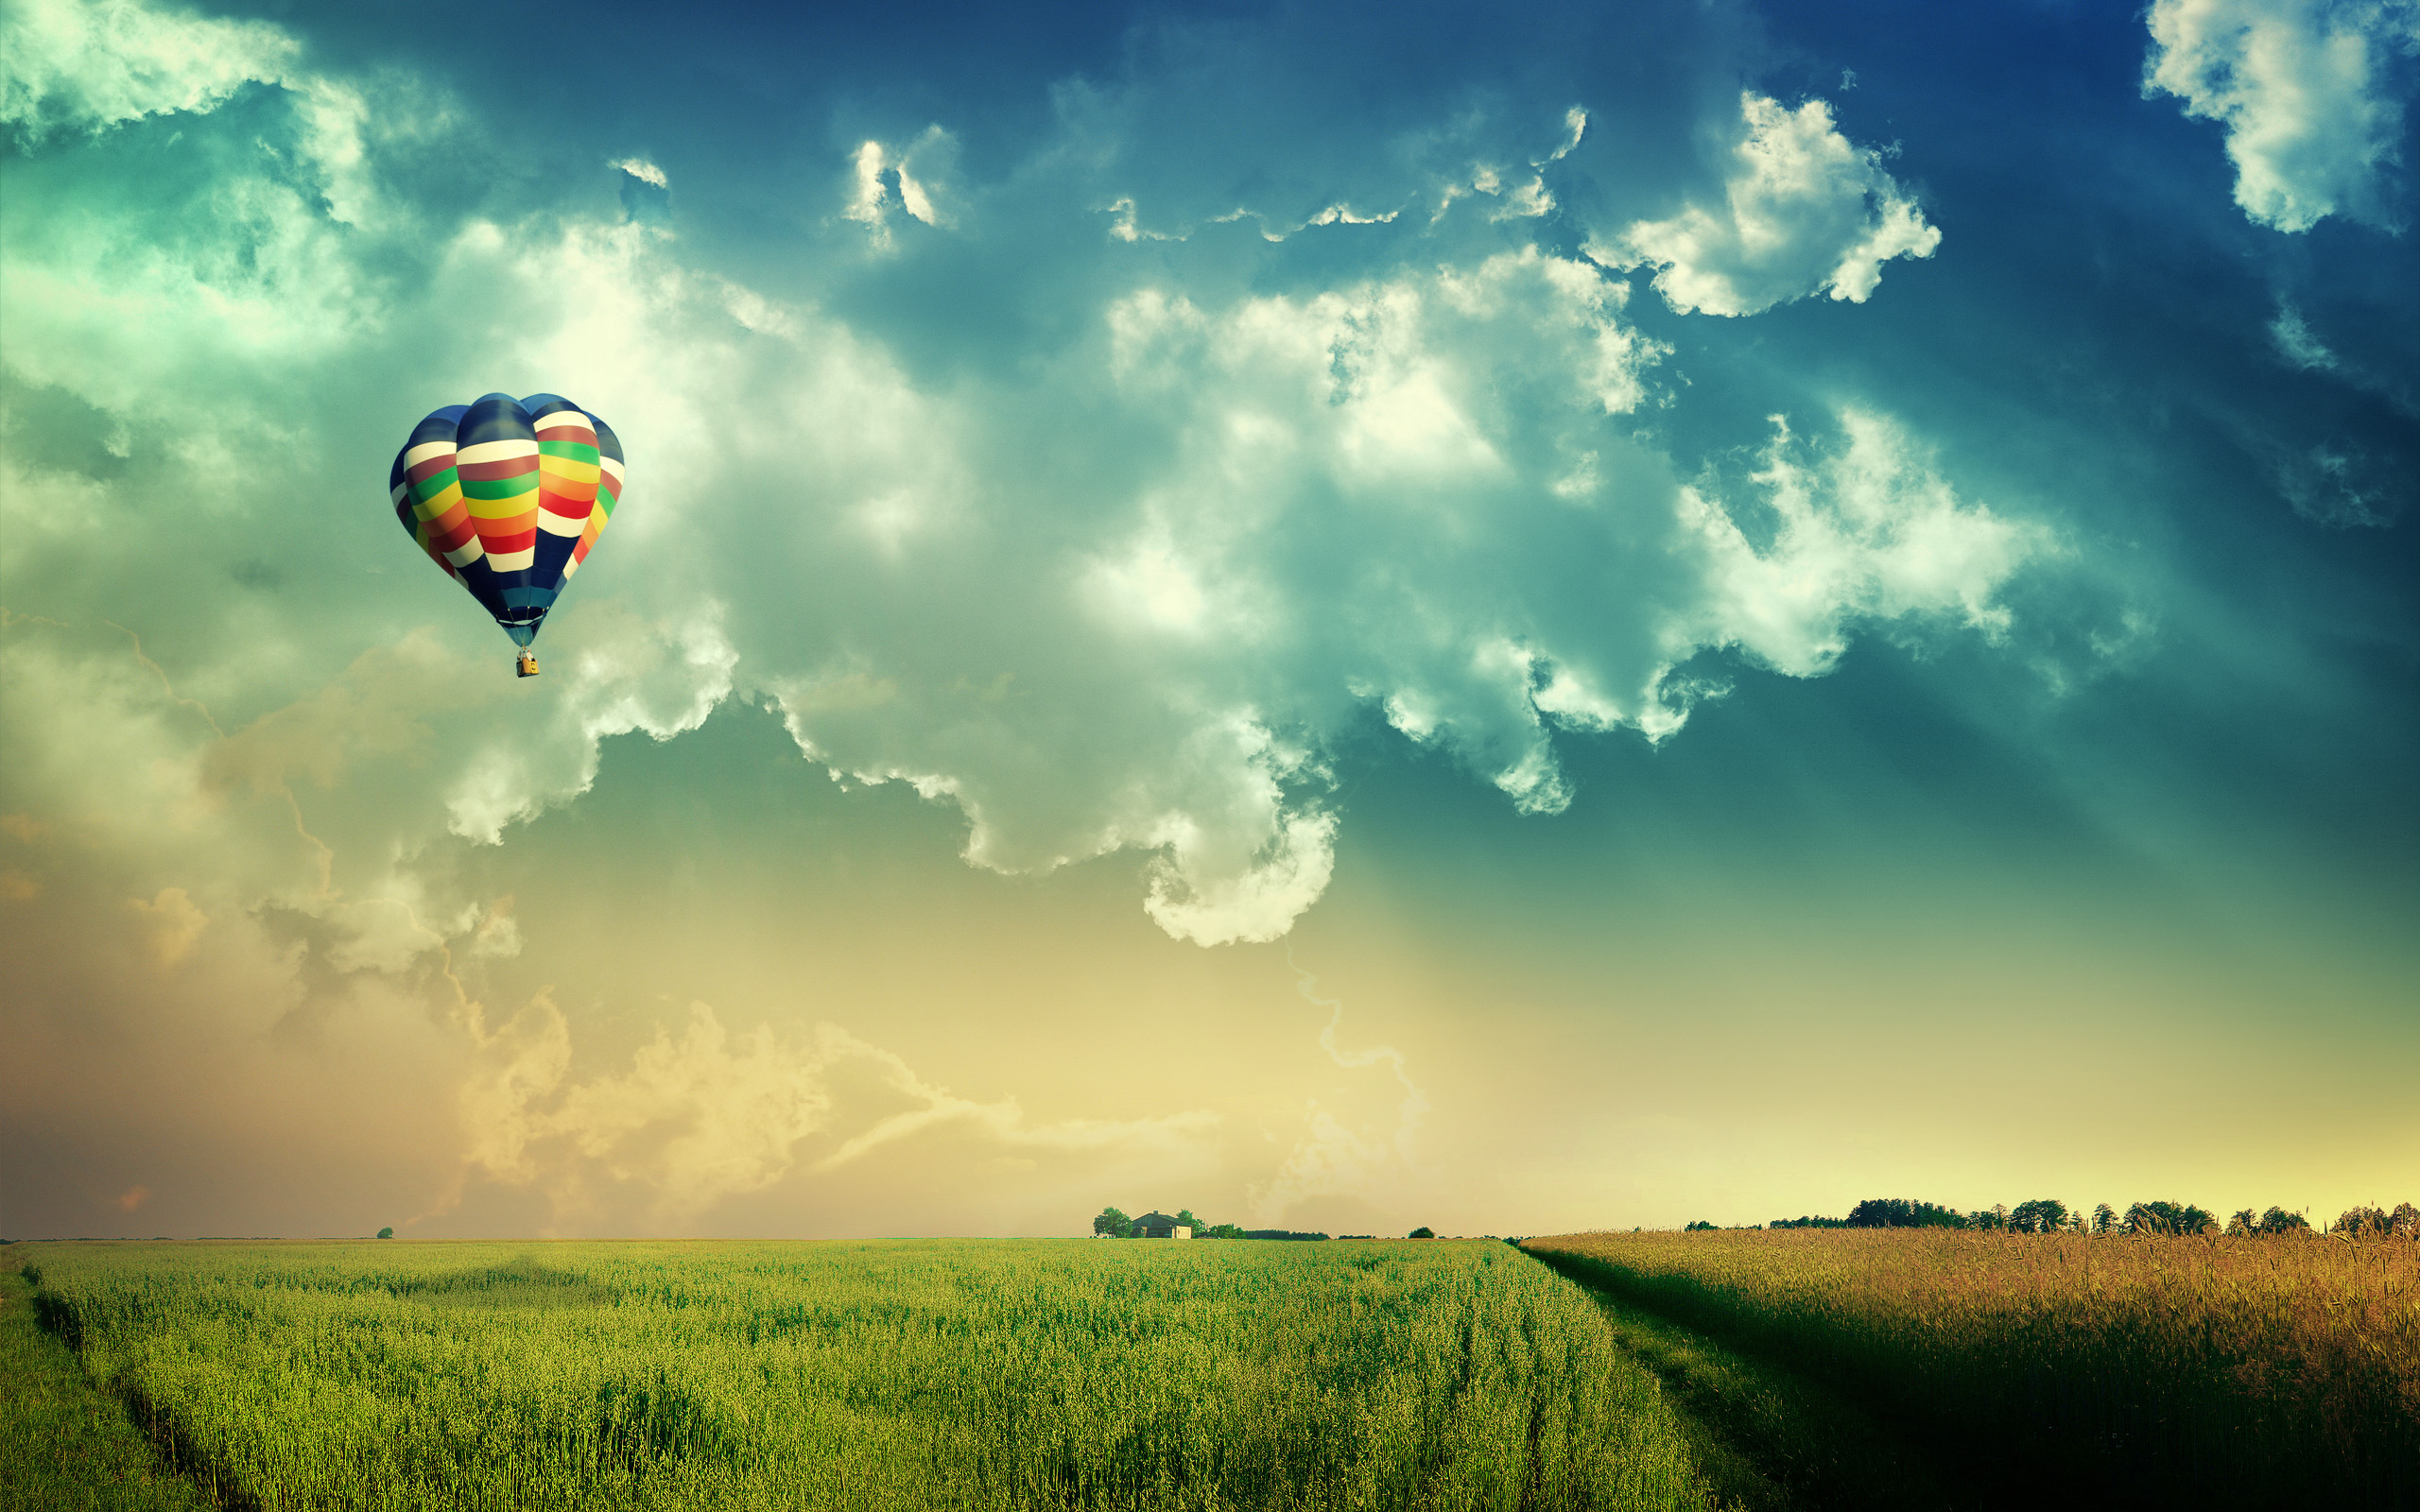 clouds, landscapes, nature, fields, hot air balloons, skyscapes - desktop wallpaper